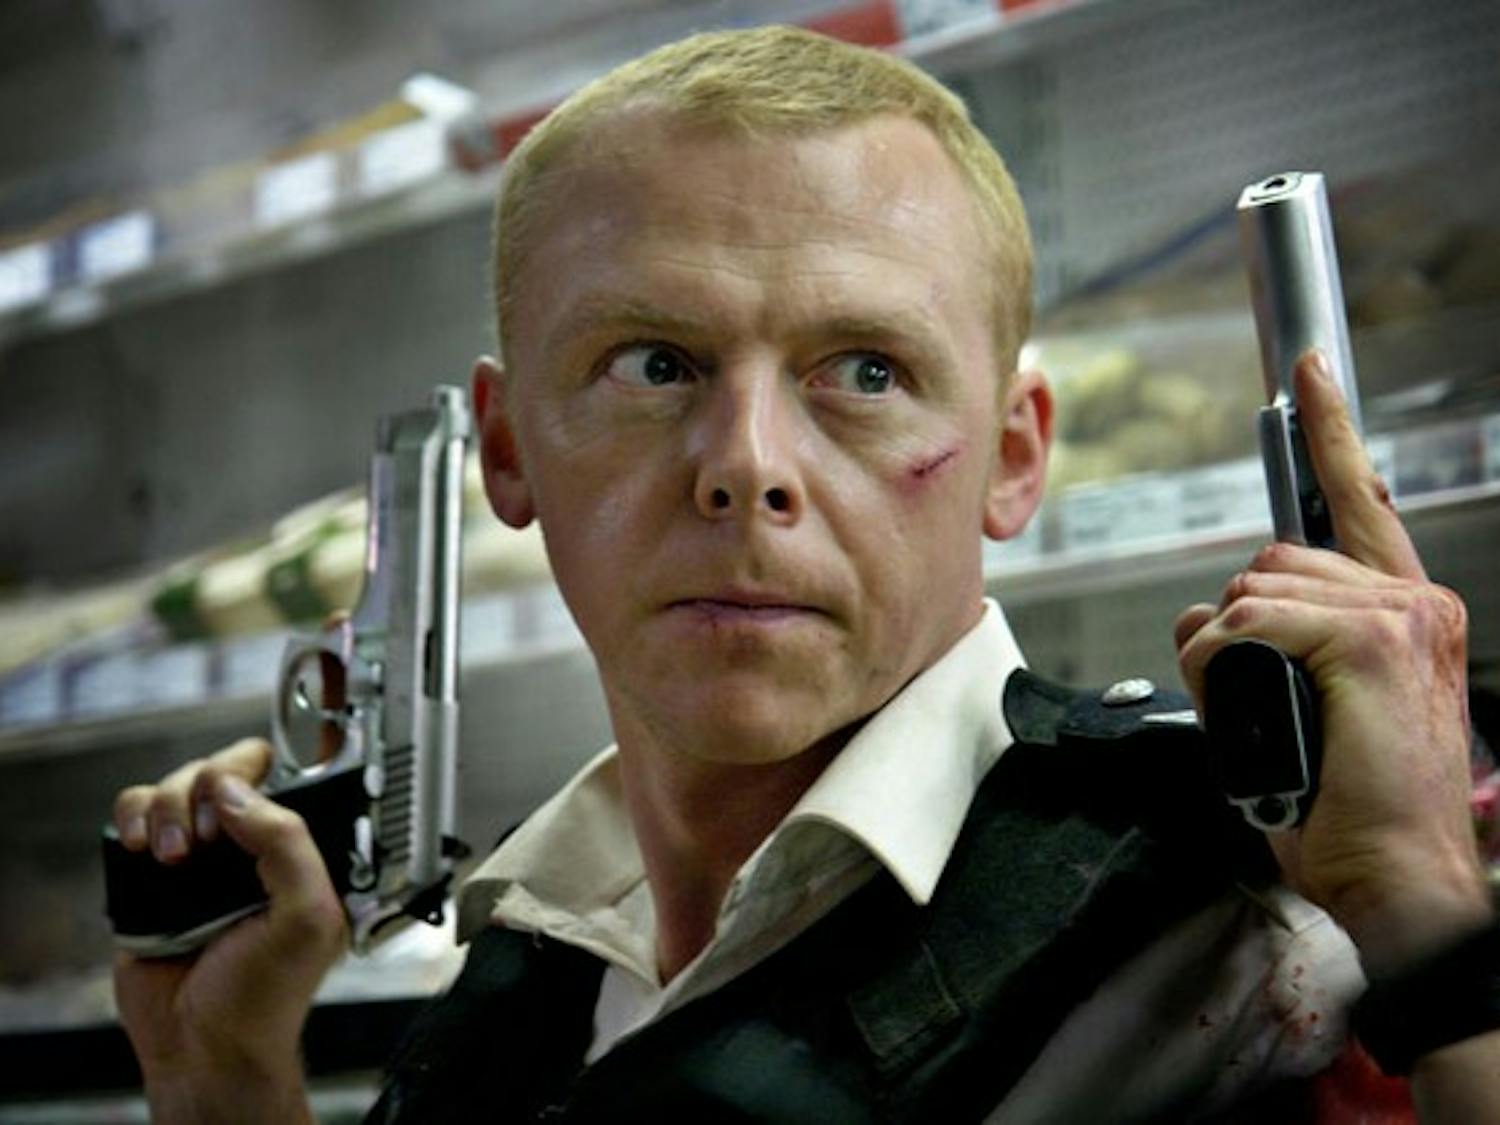 As Nicolas Angel, Simon Pegg shoots up a storm in the hilarious 'Hot Fuzz.'